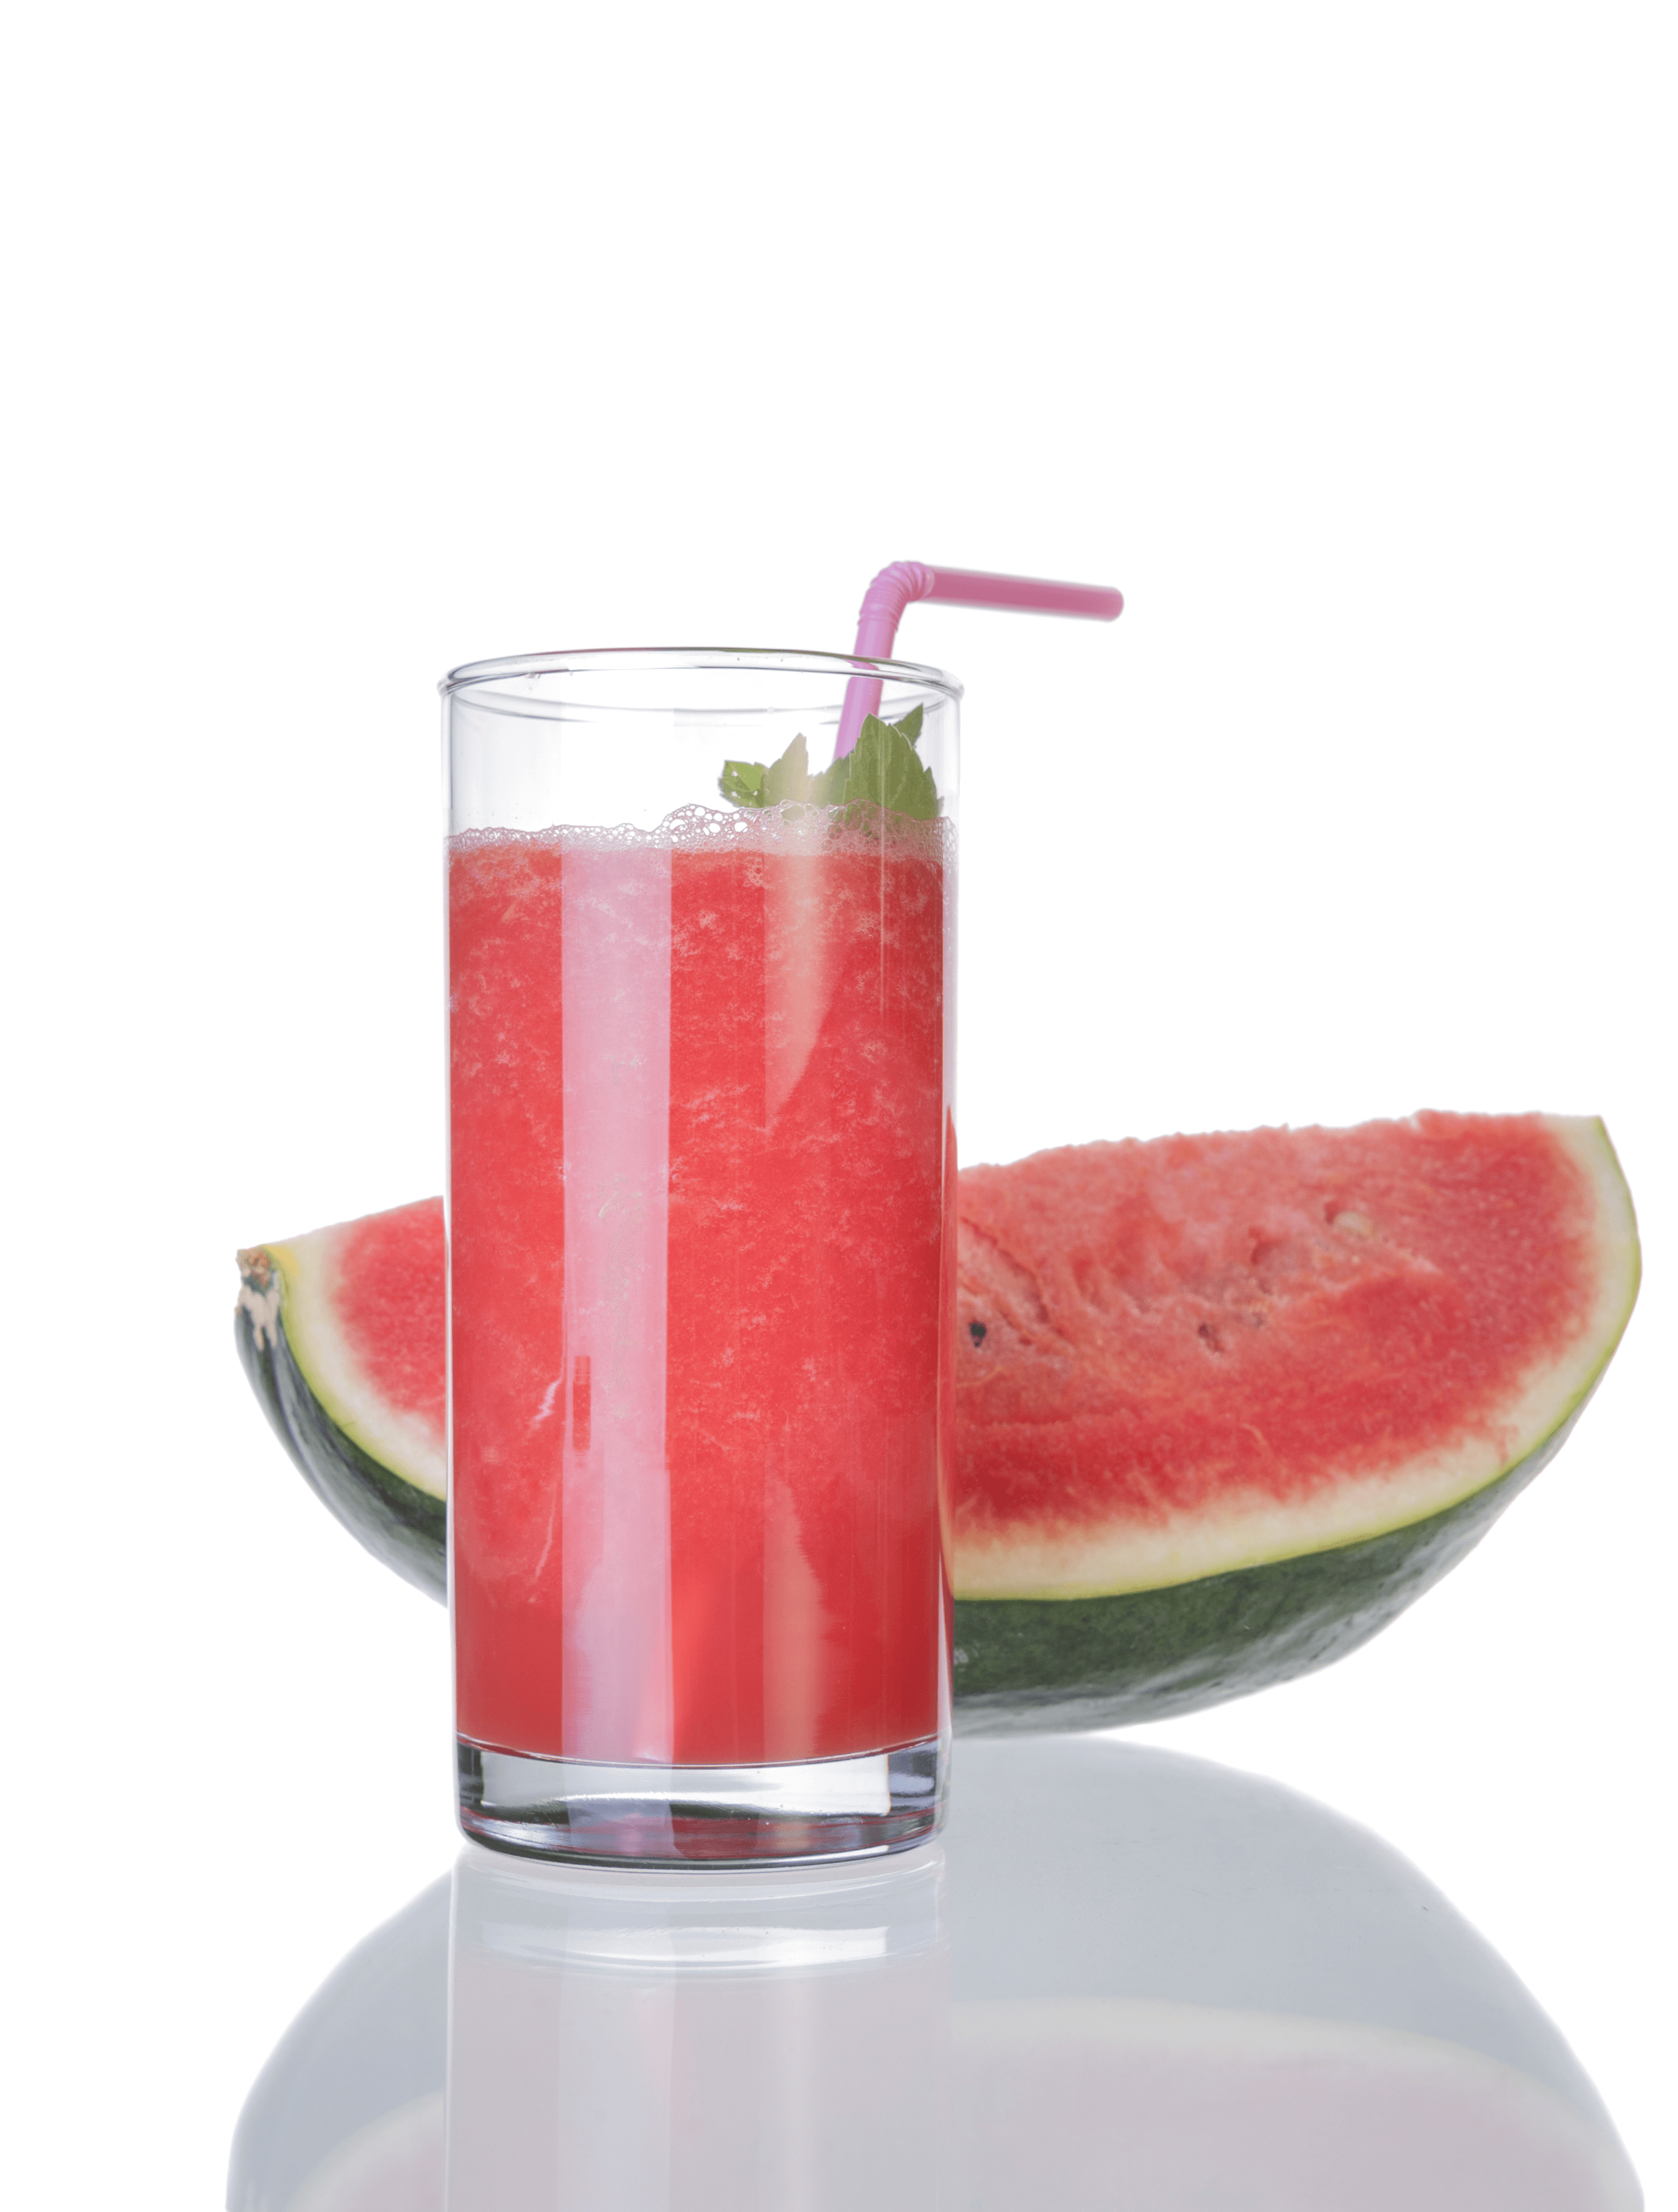 How To Make Good Watermelon Juice Step By Step Easy Typical Of Sampang City